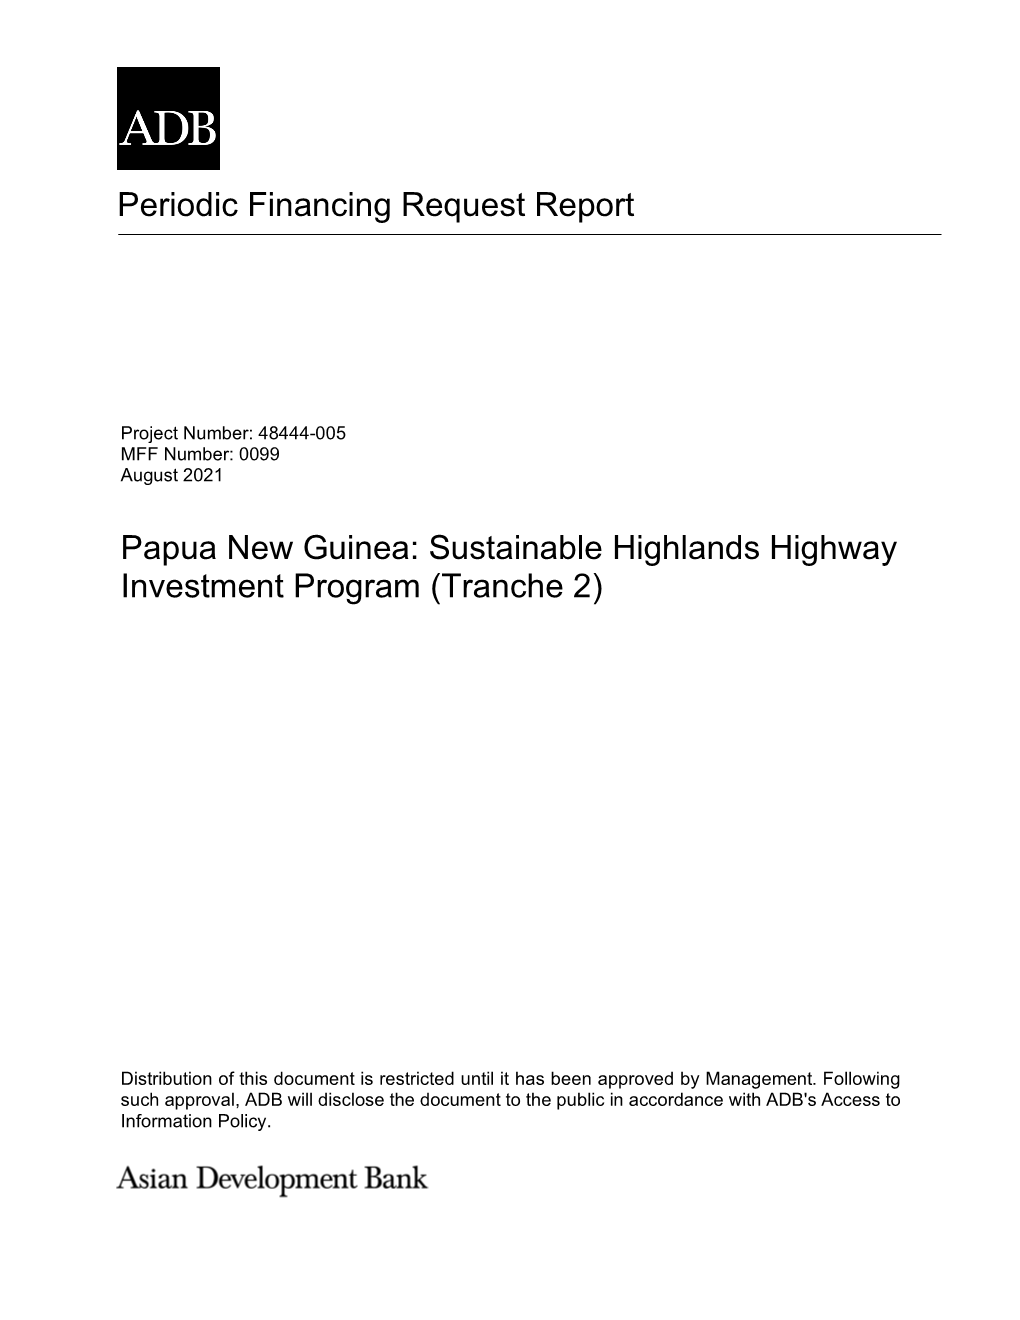 Sustainable Highlands Highway Investment Program, Tranche 2